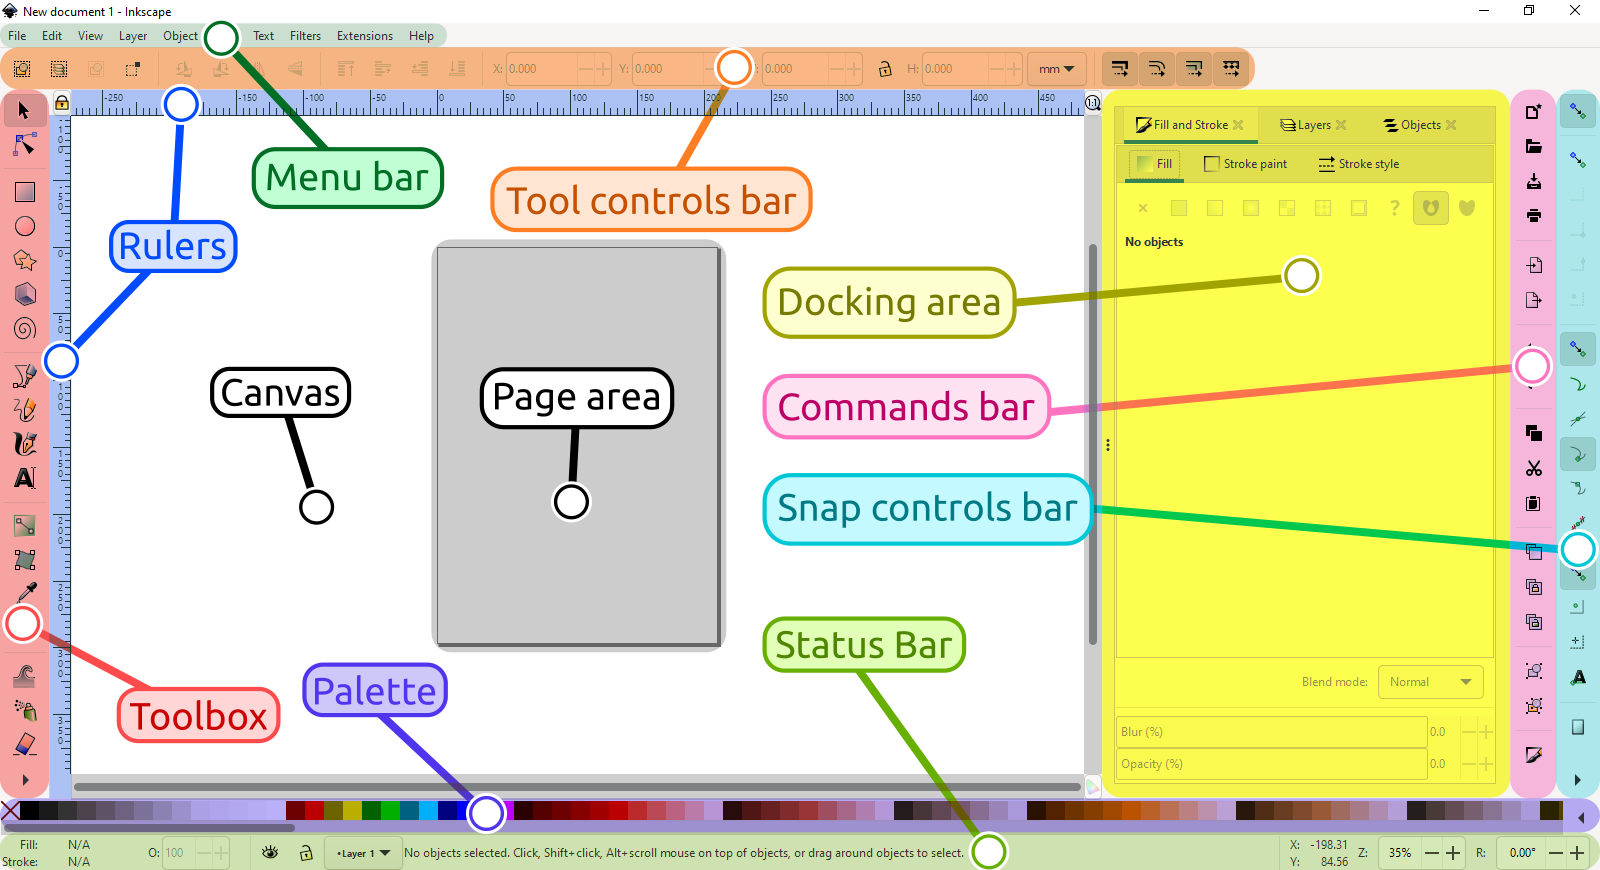 The main areas of the Inkscape user interface